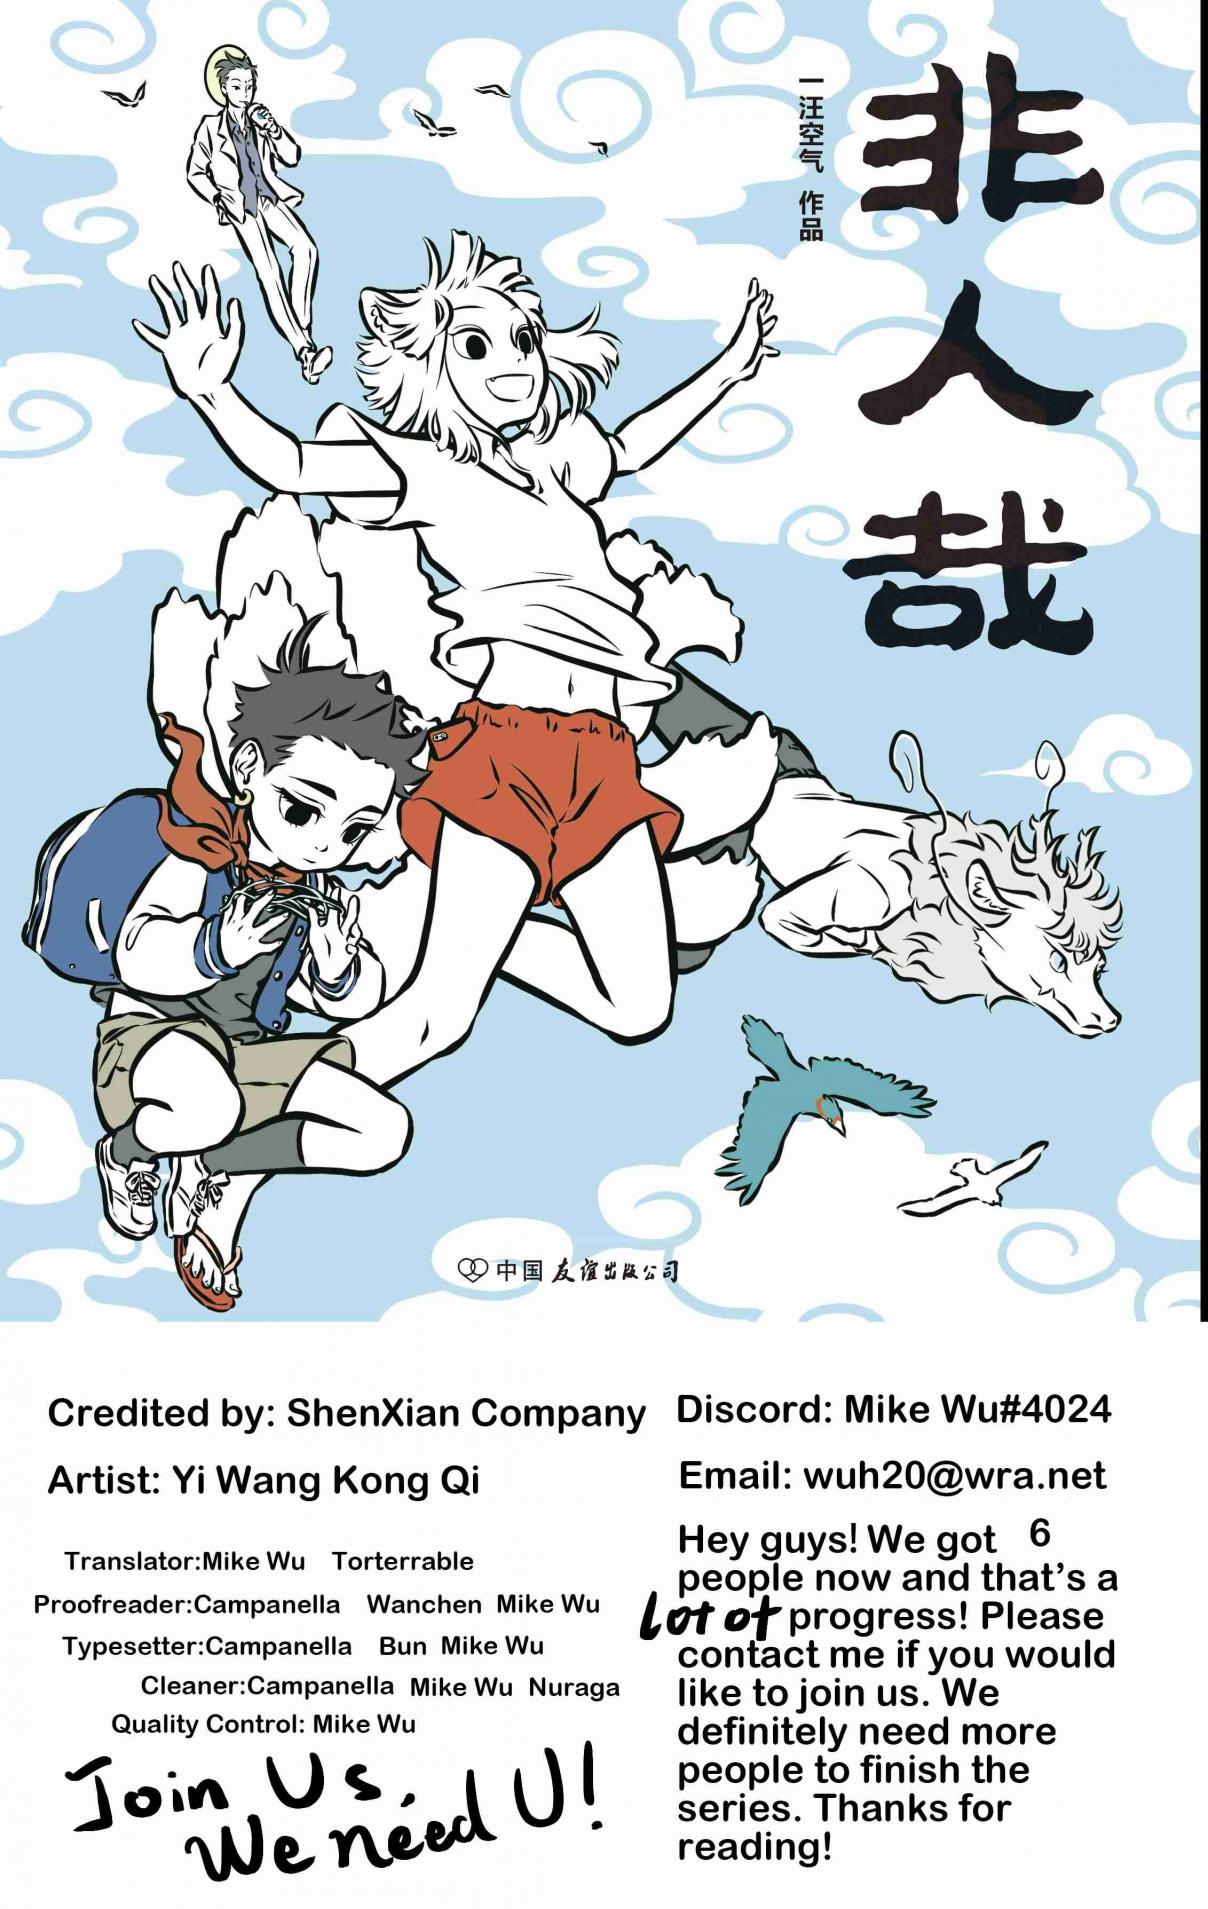 Fei Ren Zai Ch. 66 Closing to the Spring Festival, Some People Are Happy While Some Animals Are Sad